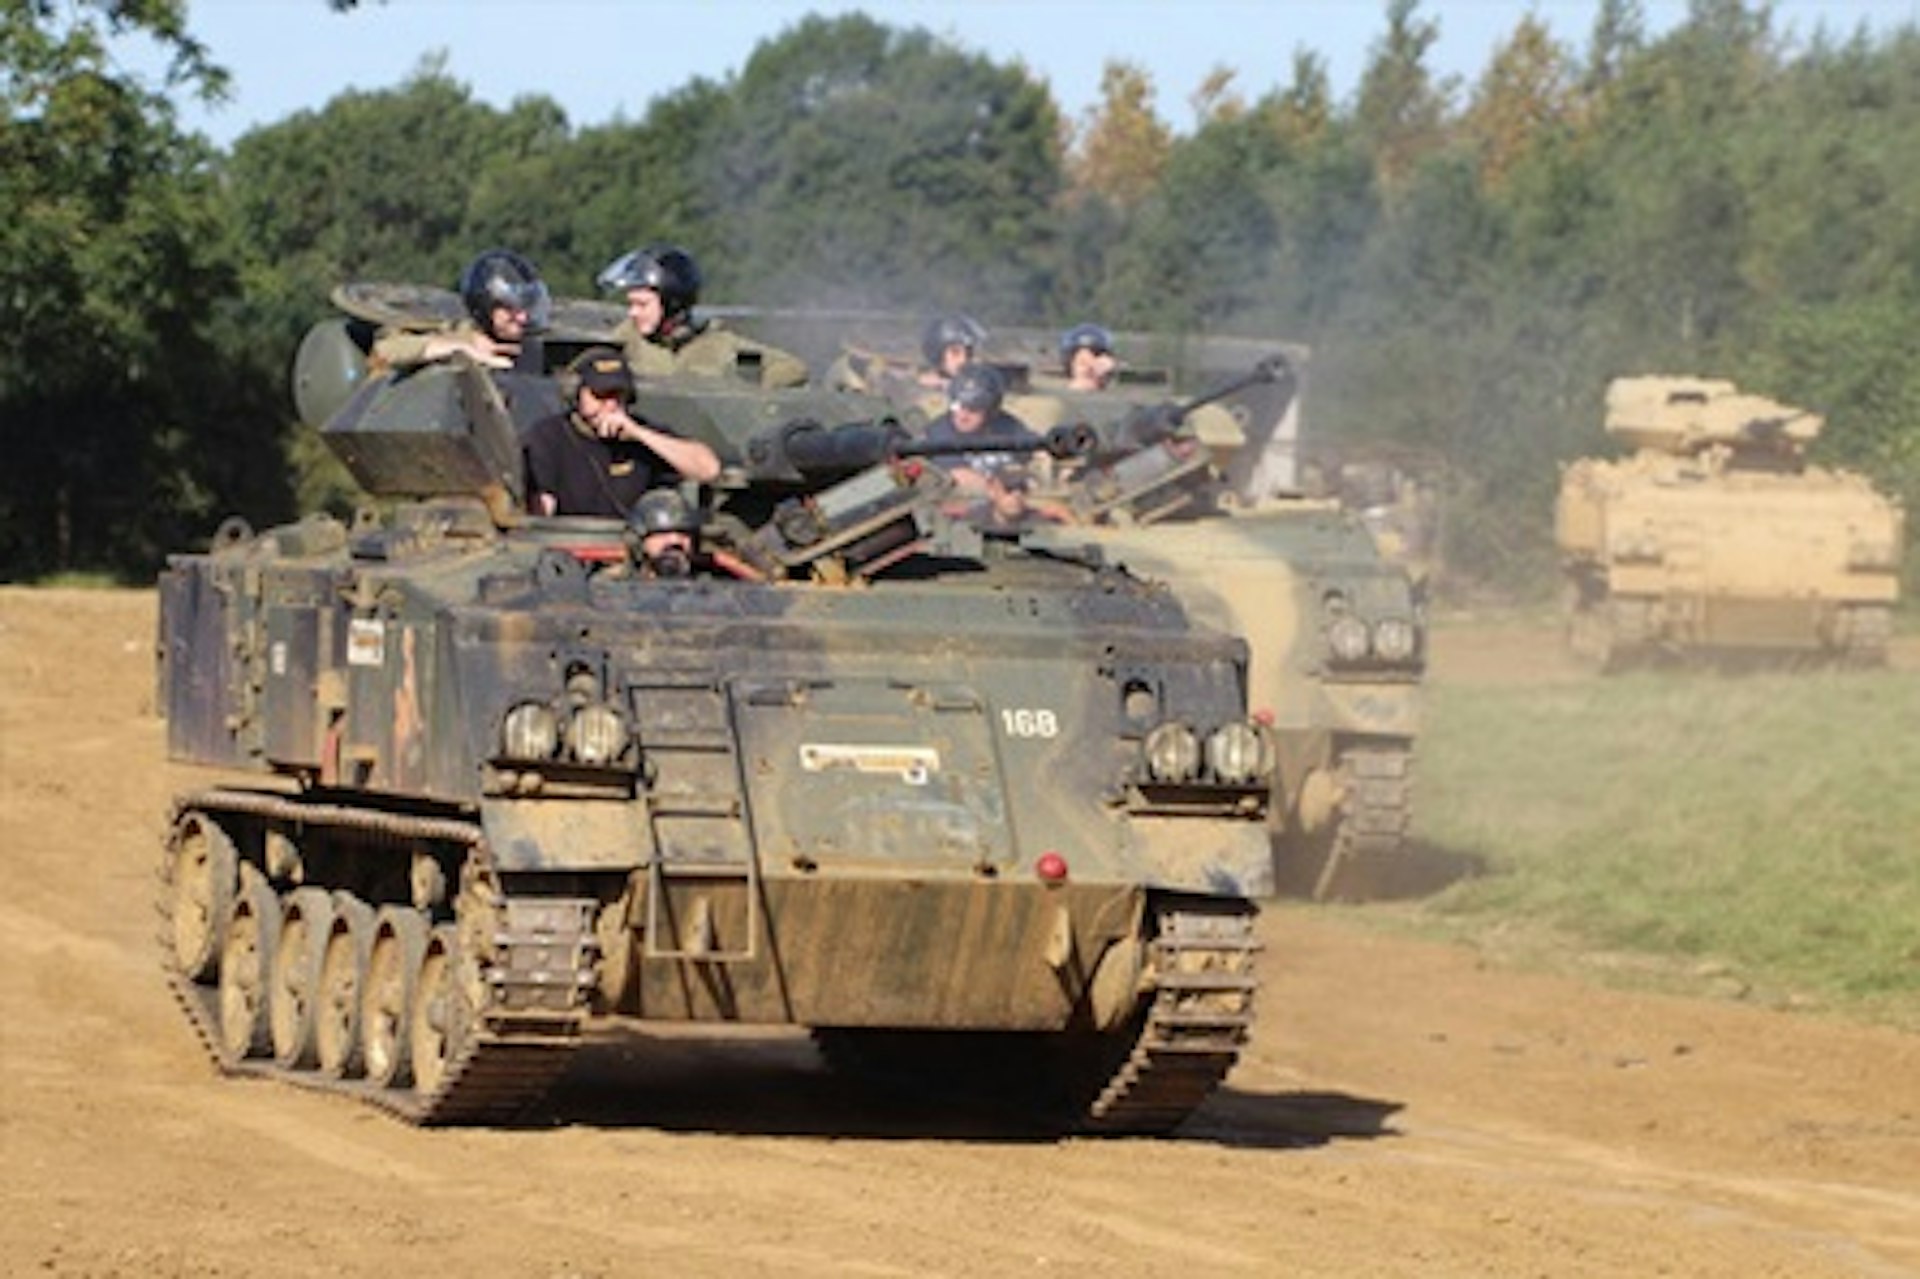 Adult and Child Tank Driving Experience 2